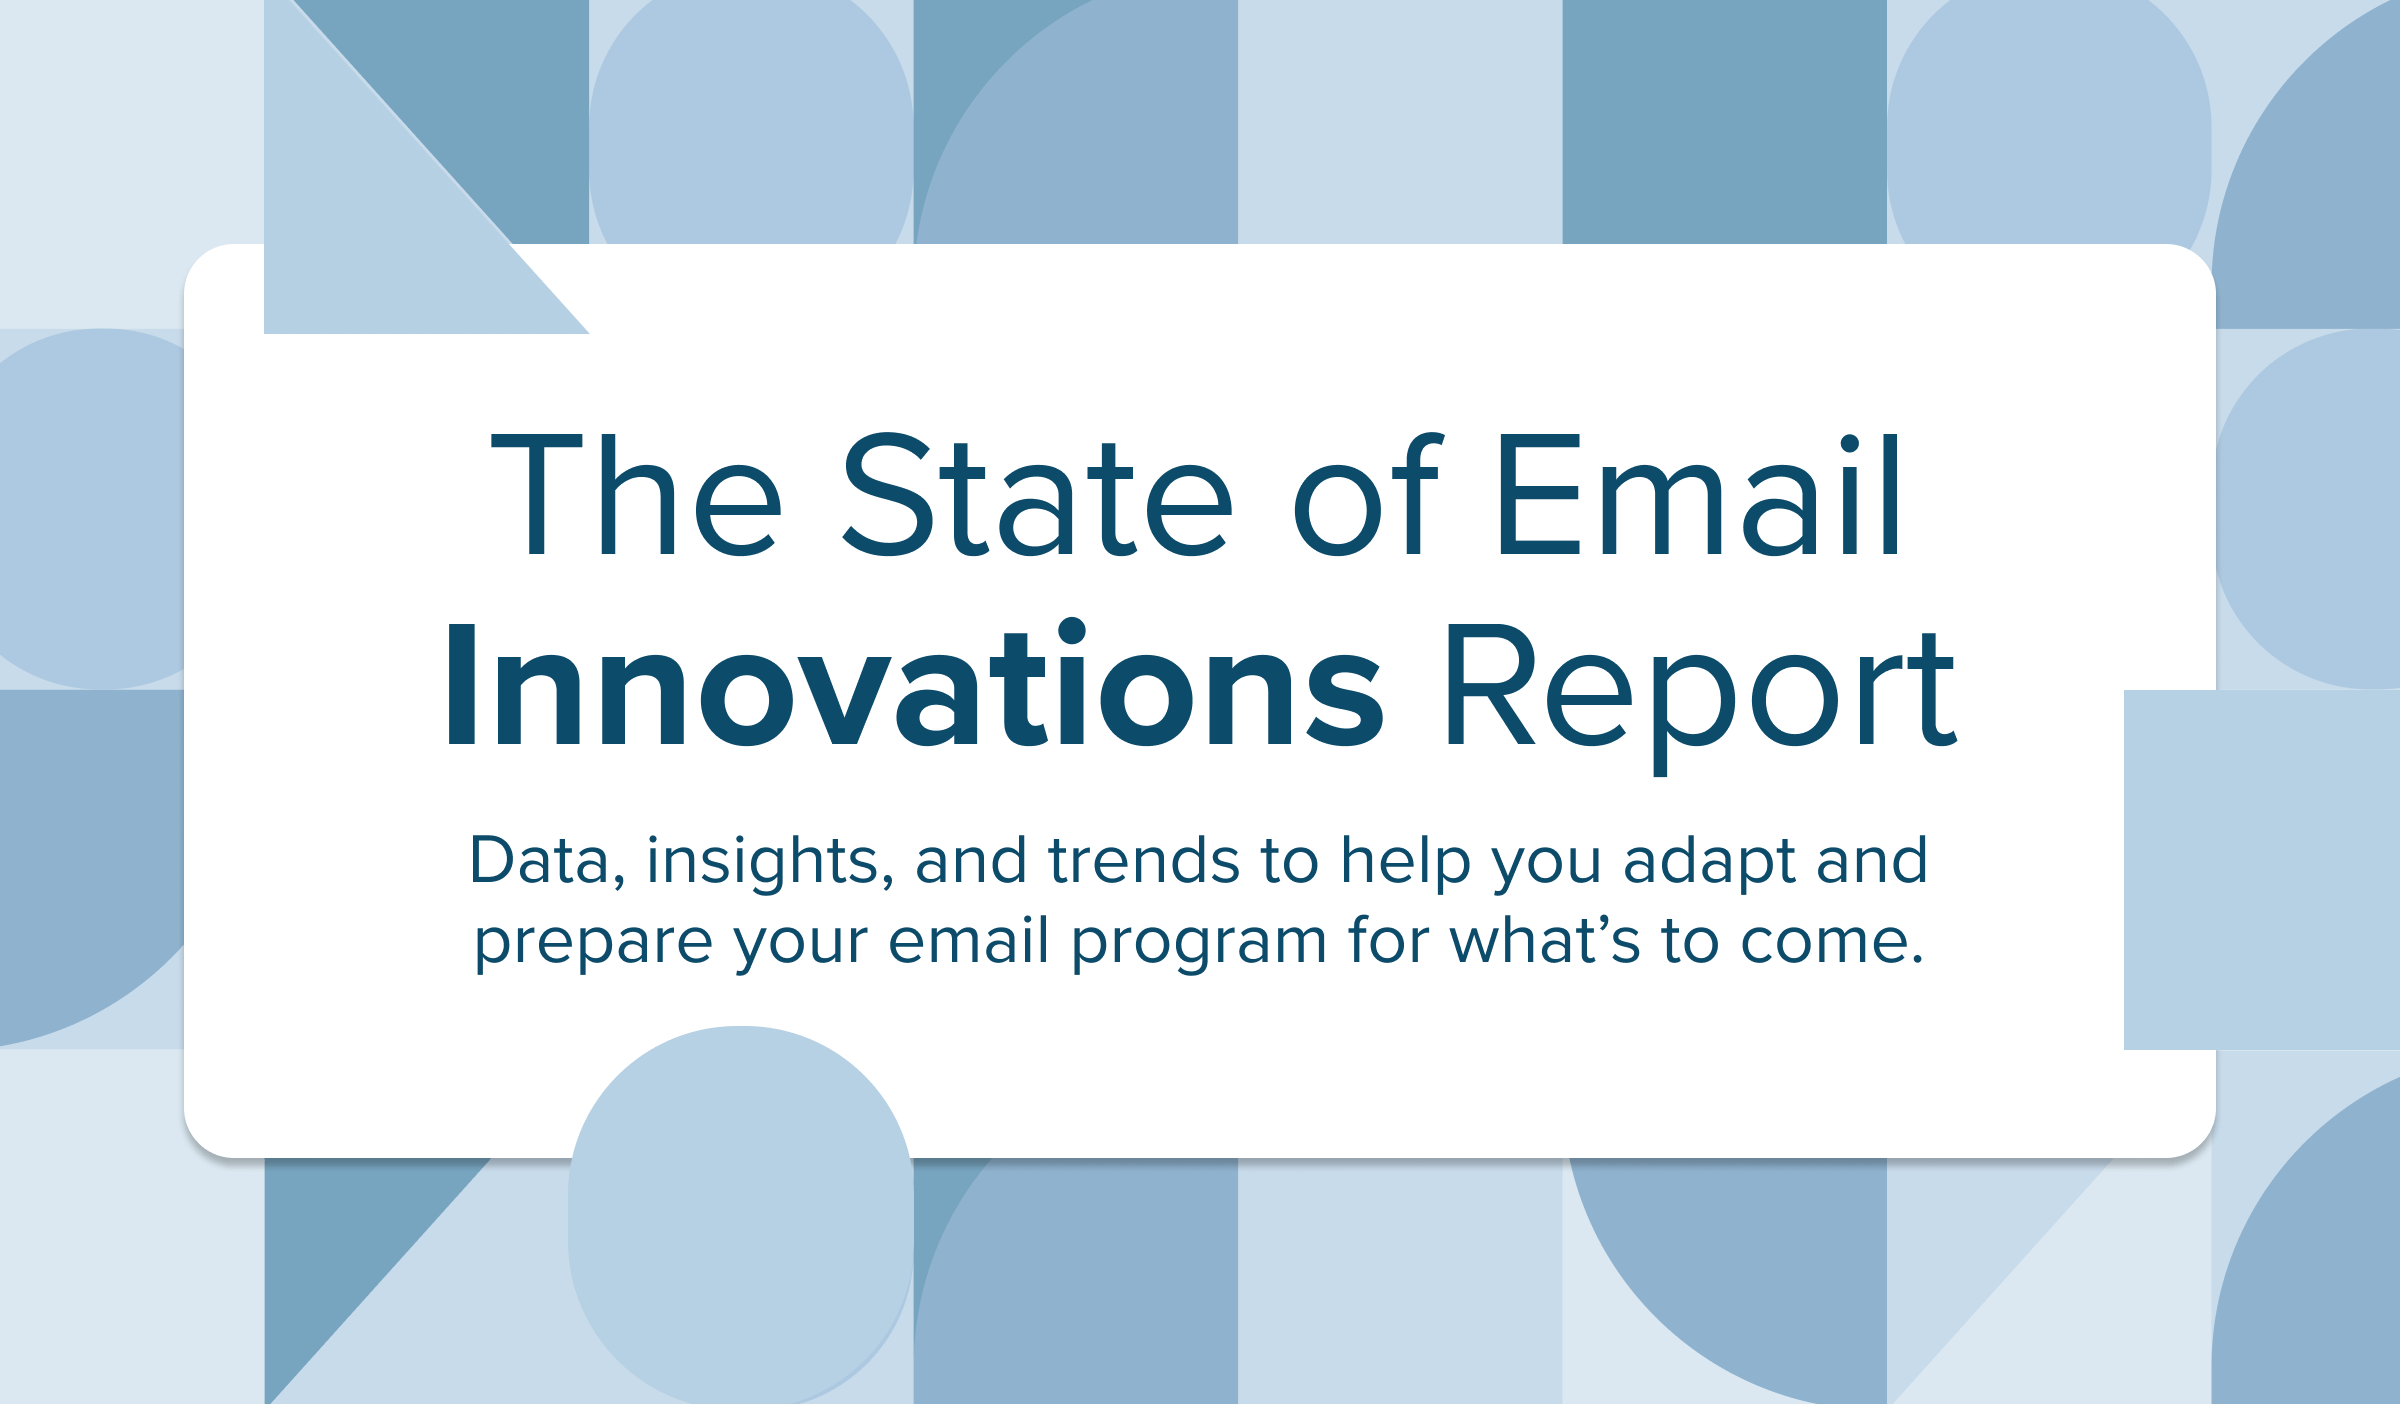 The State of Email Innovations Report